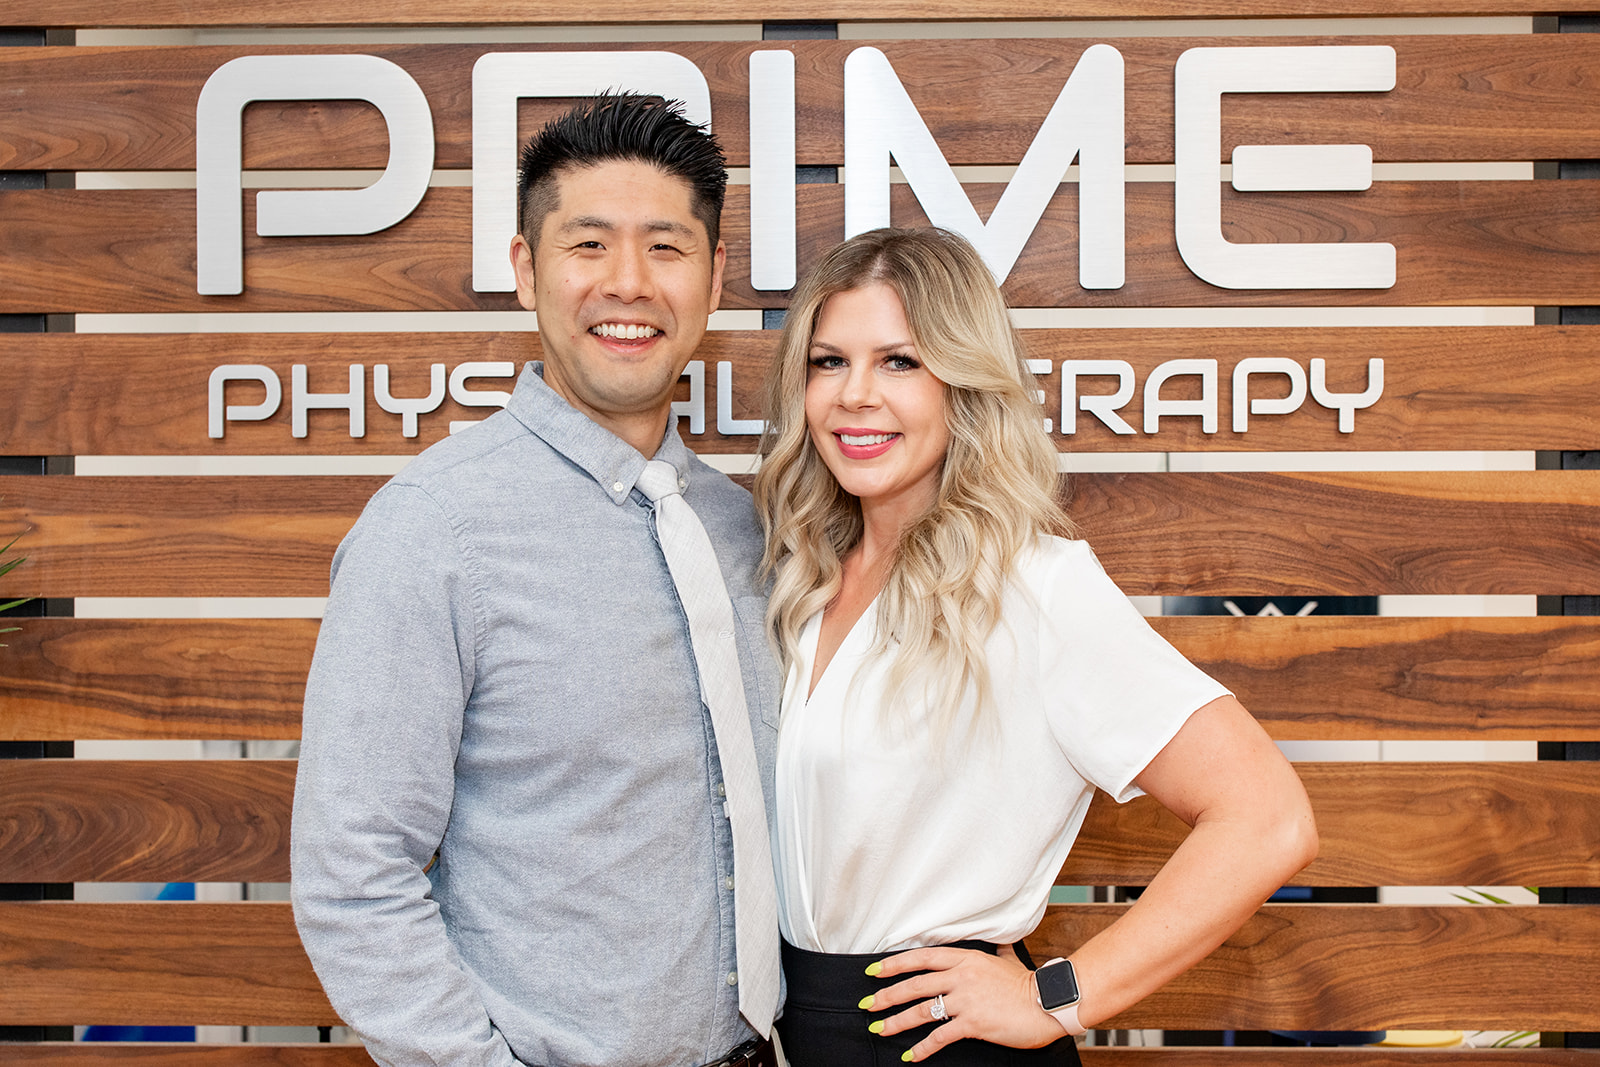 Physical therapists Dr. Won and Dr. Laura Yoo own and operate PRIME Physical Therapy together as a married couple.